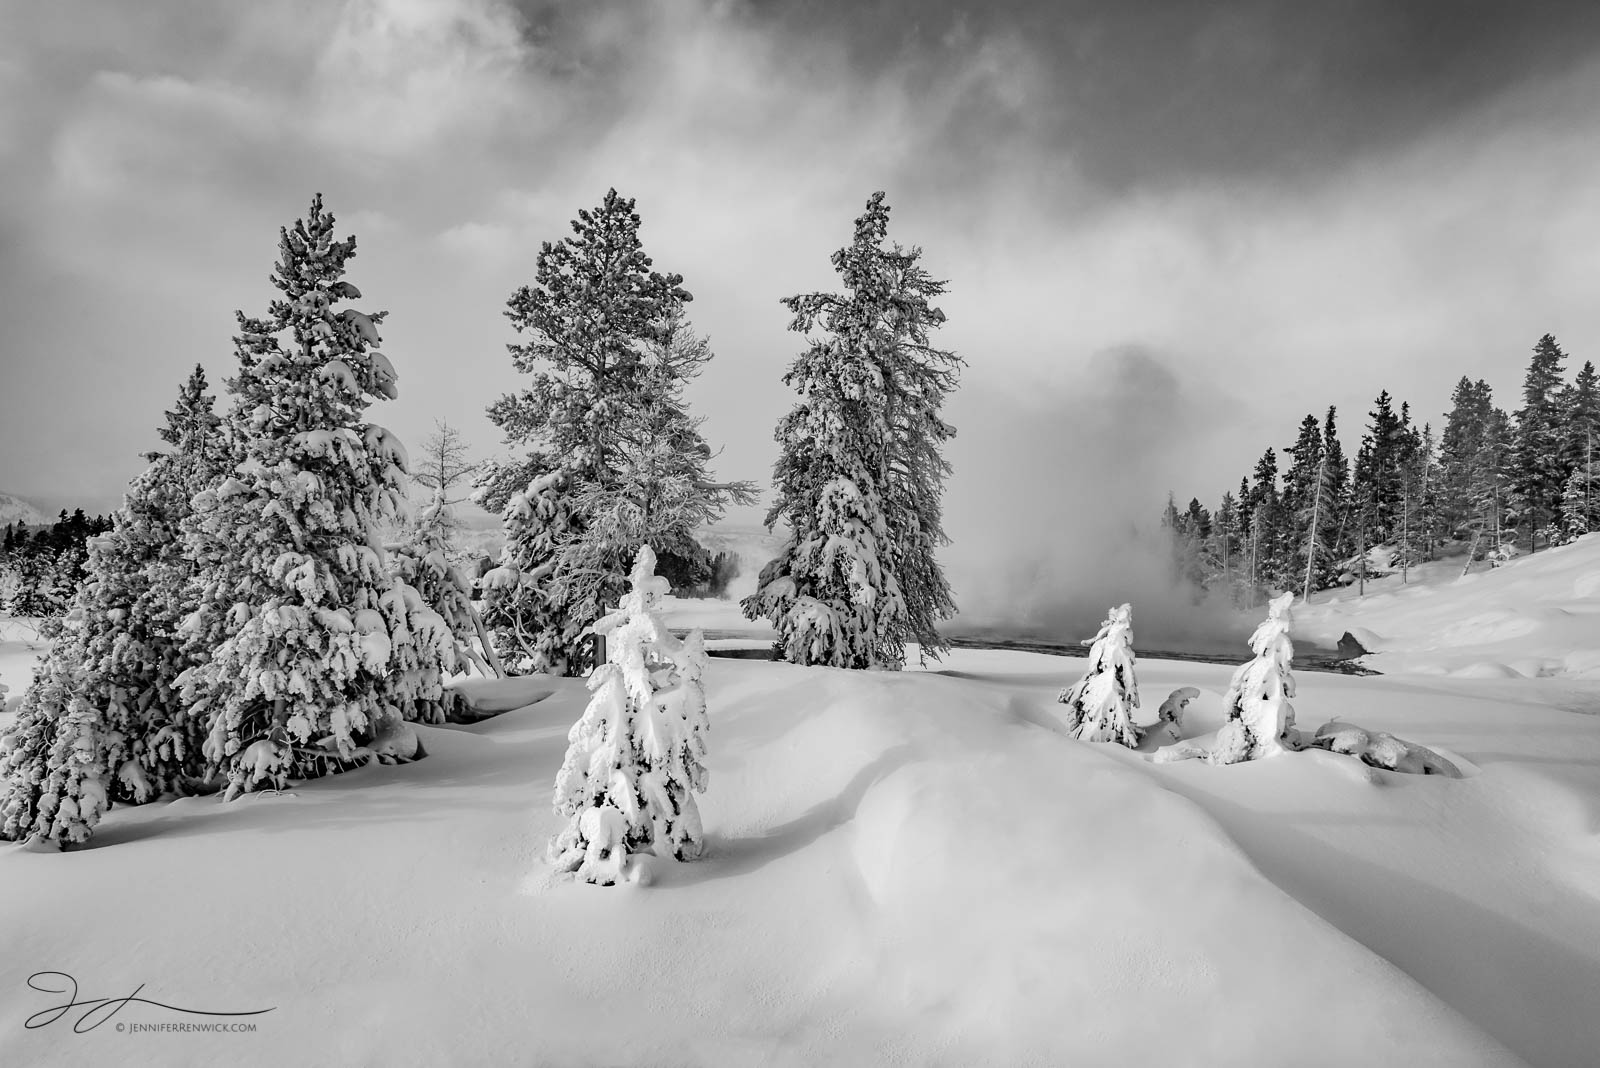 A future generation of younger trees is coated in snow and rime ice in Yellowstone National Park.  This image is part of my "...